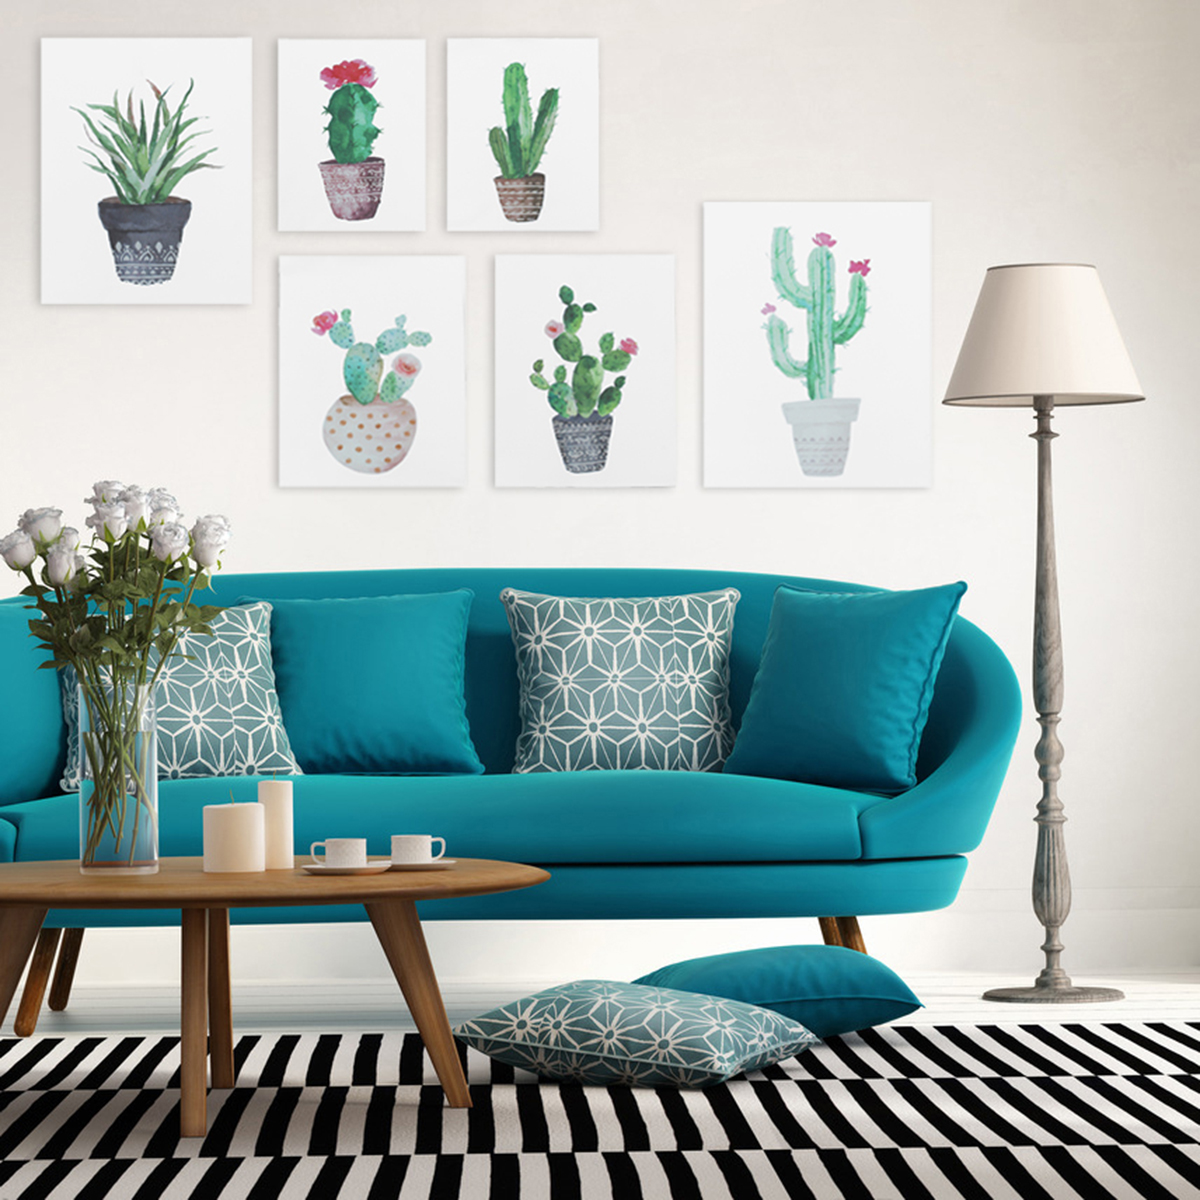 Watercolor-Cactus-Canvas-Painting-Unframed-Wall-mounted-Modern-Art-Painting-for-Living-Room-Bedroom--1867206-1